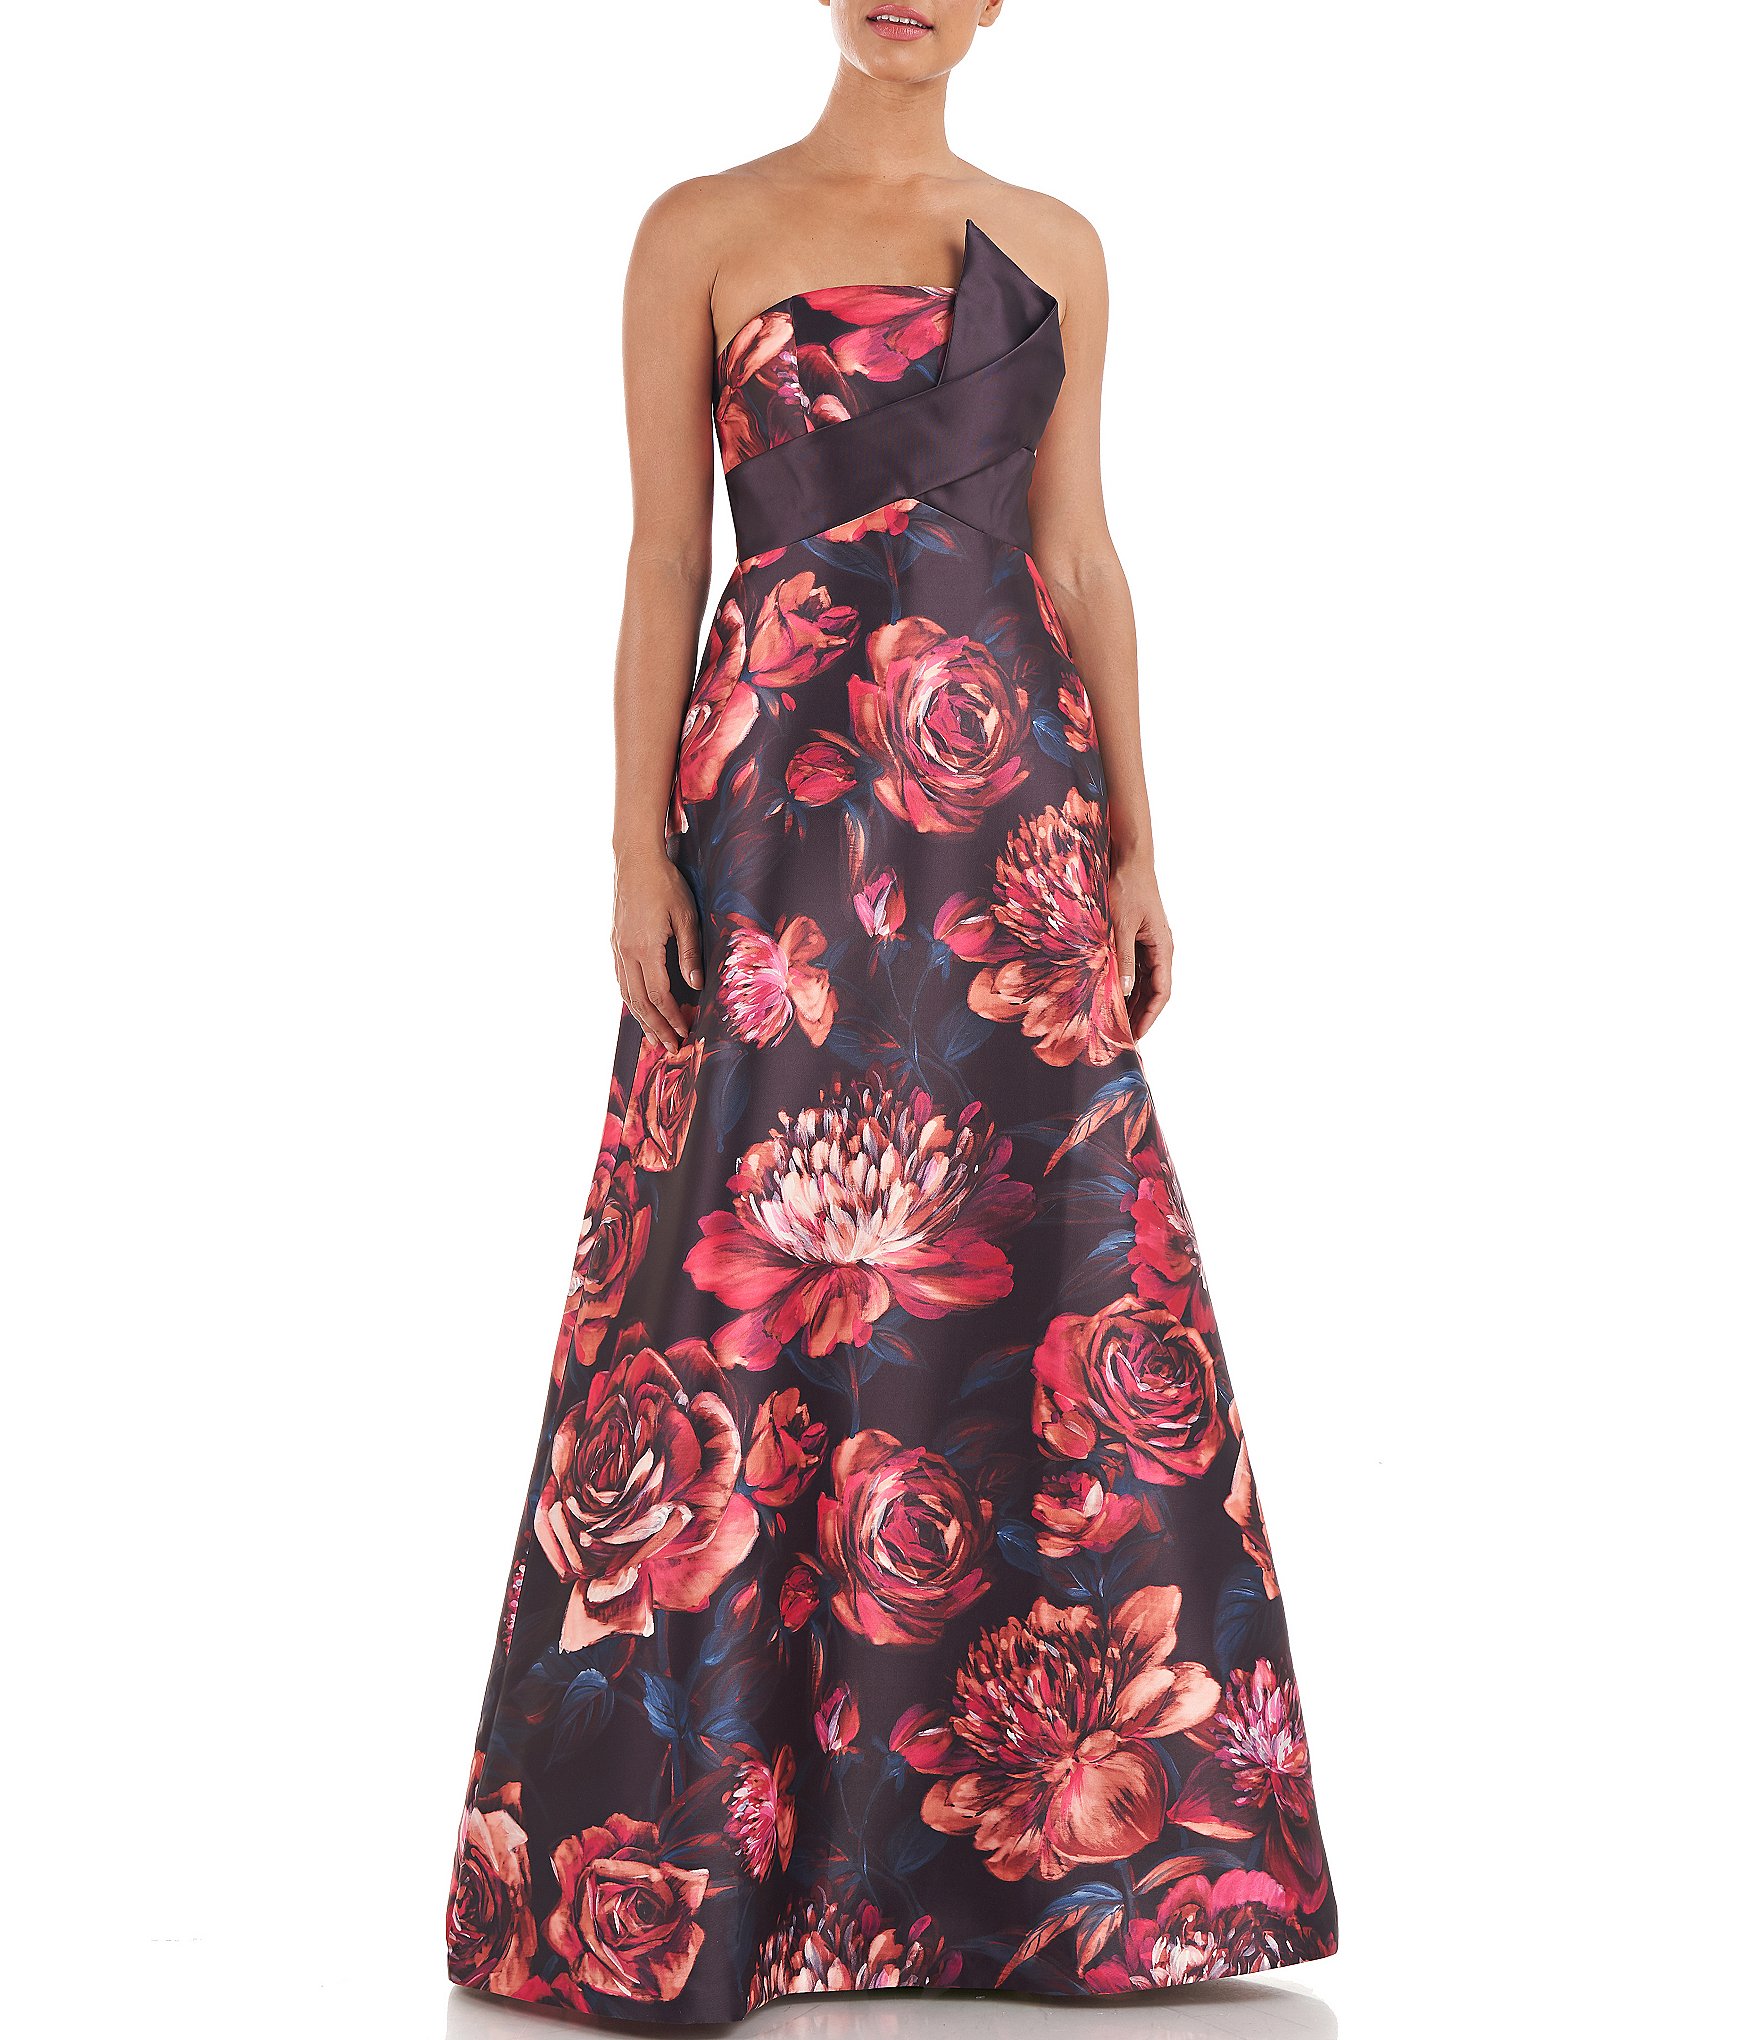 Kay Unger Floral Print Strapless Sleeveless Flared Pocketed Ballgown ...